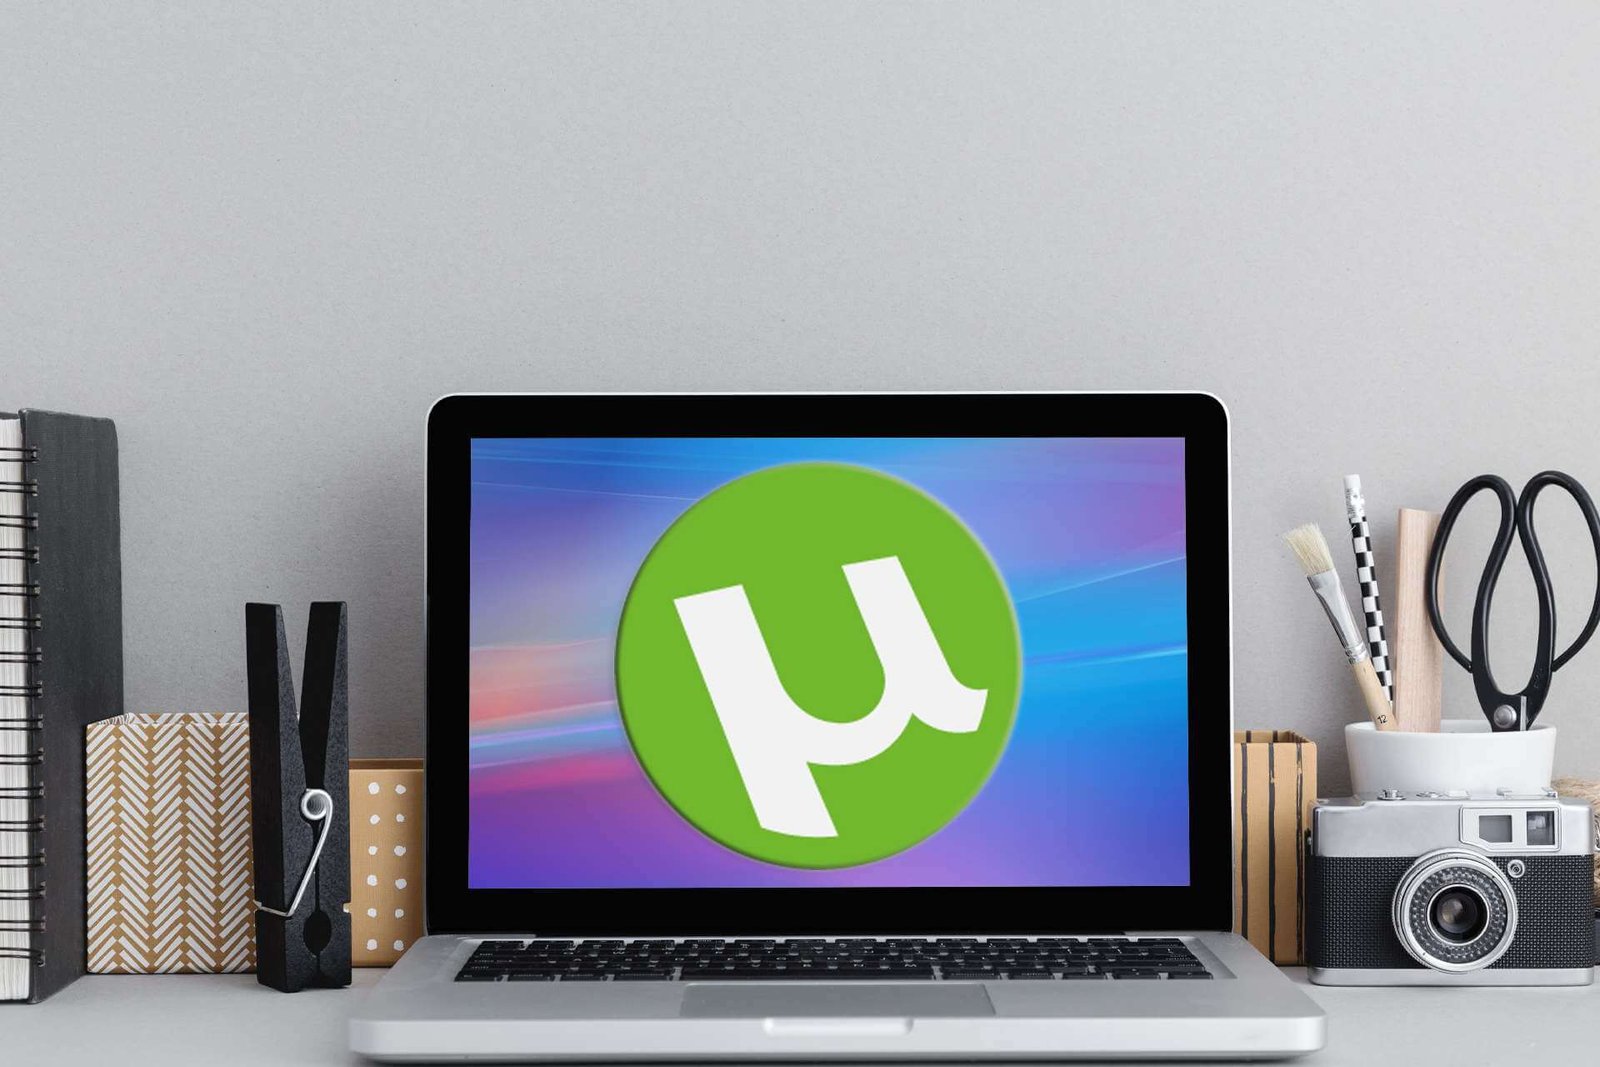 Utorrent Alternatives: 7 Torrent Clients to Try in 2022